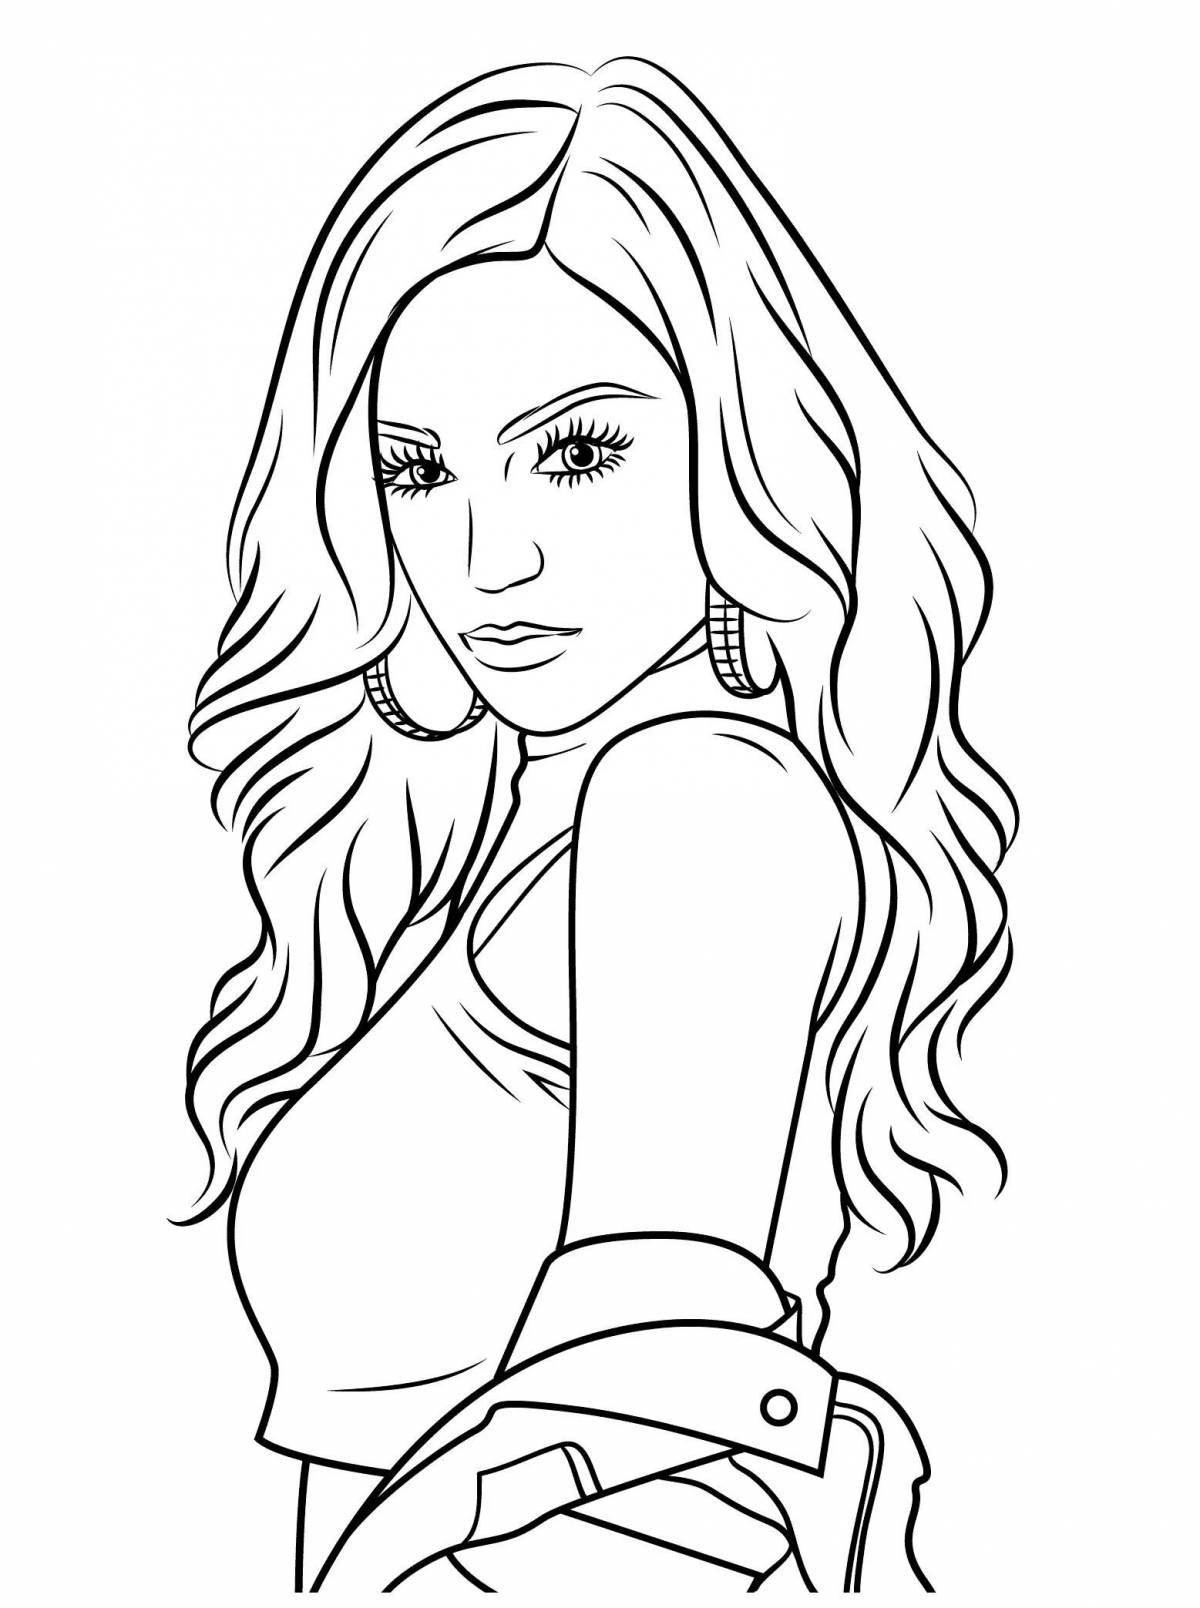 Coloring page playful fashionista